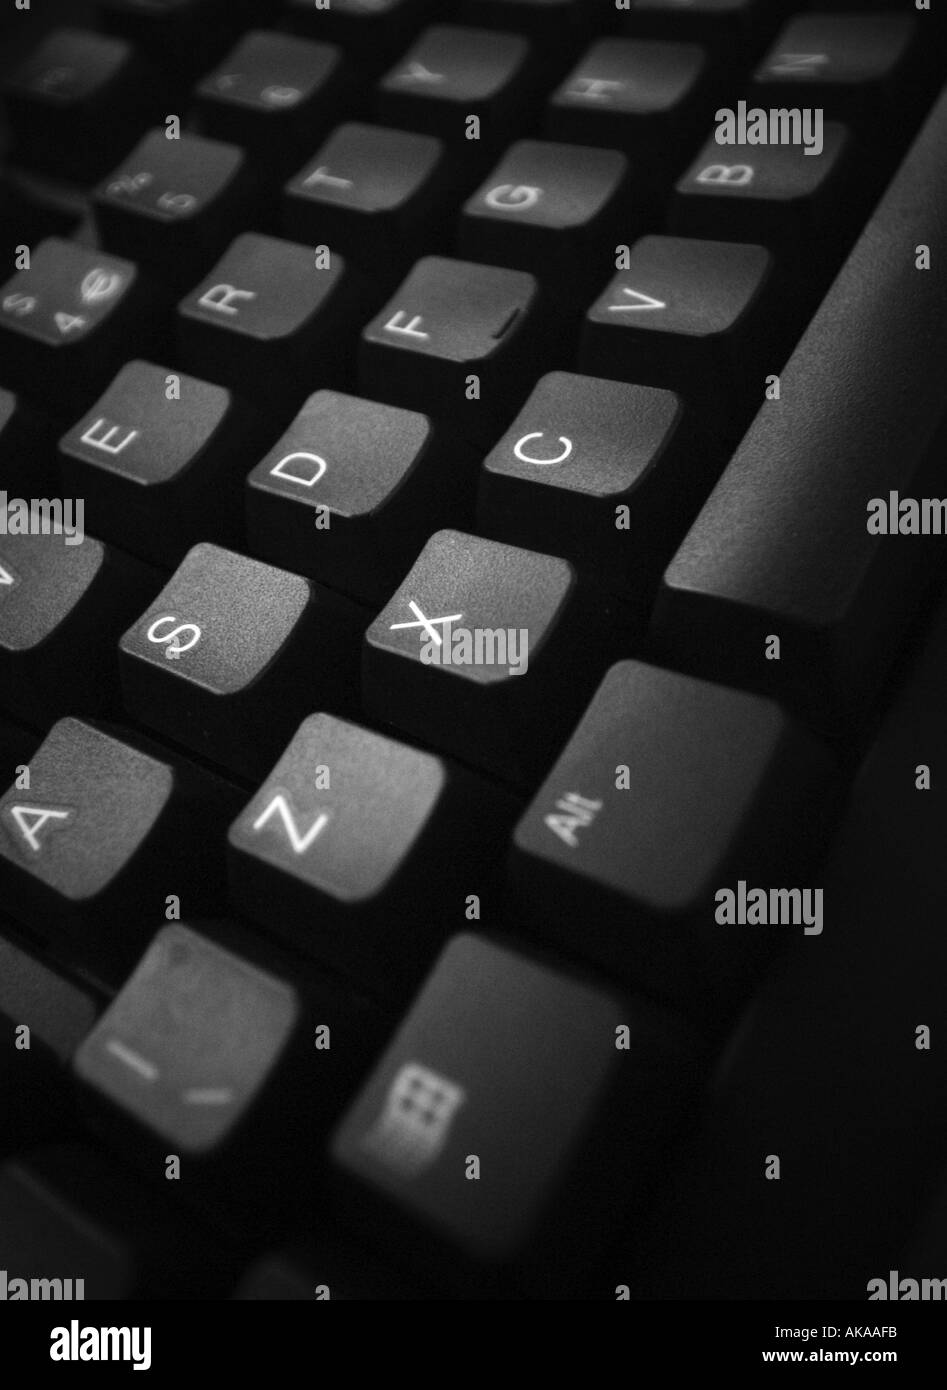 qwerty keyboard computer IT infomation technolgy PC IBM type write input data entry typing repetitive strain office injury claim Stock Photo